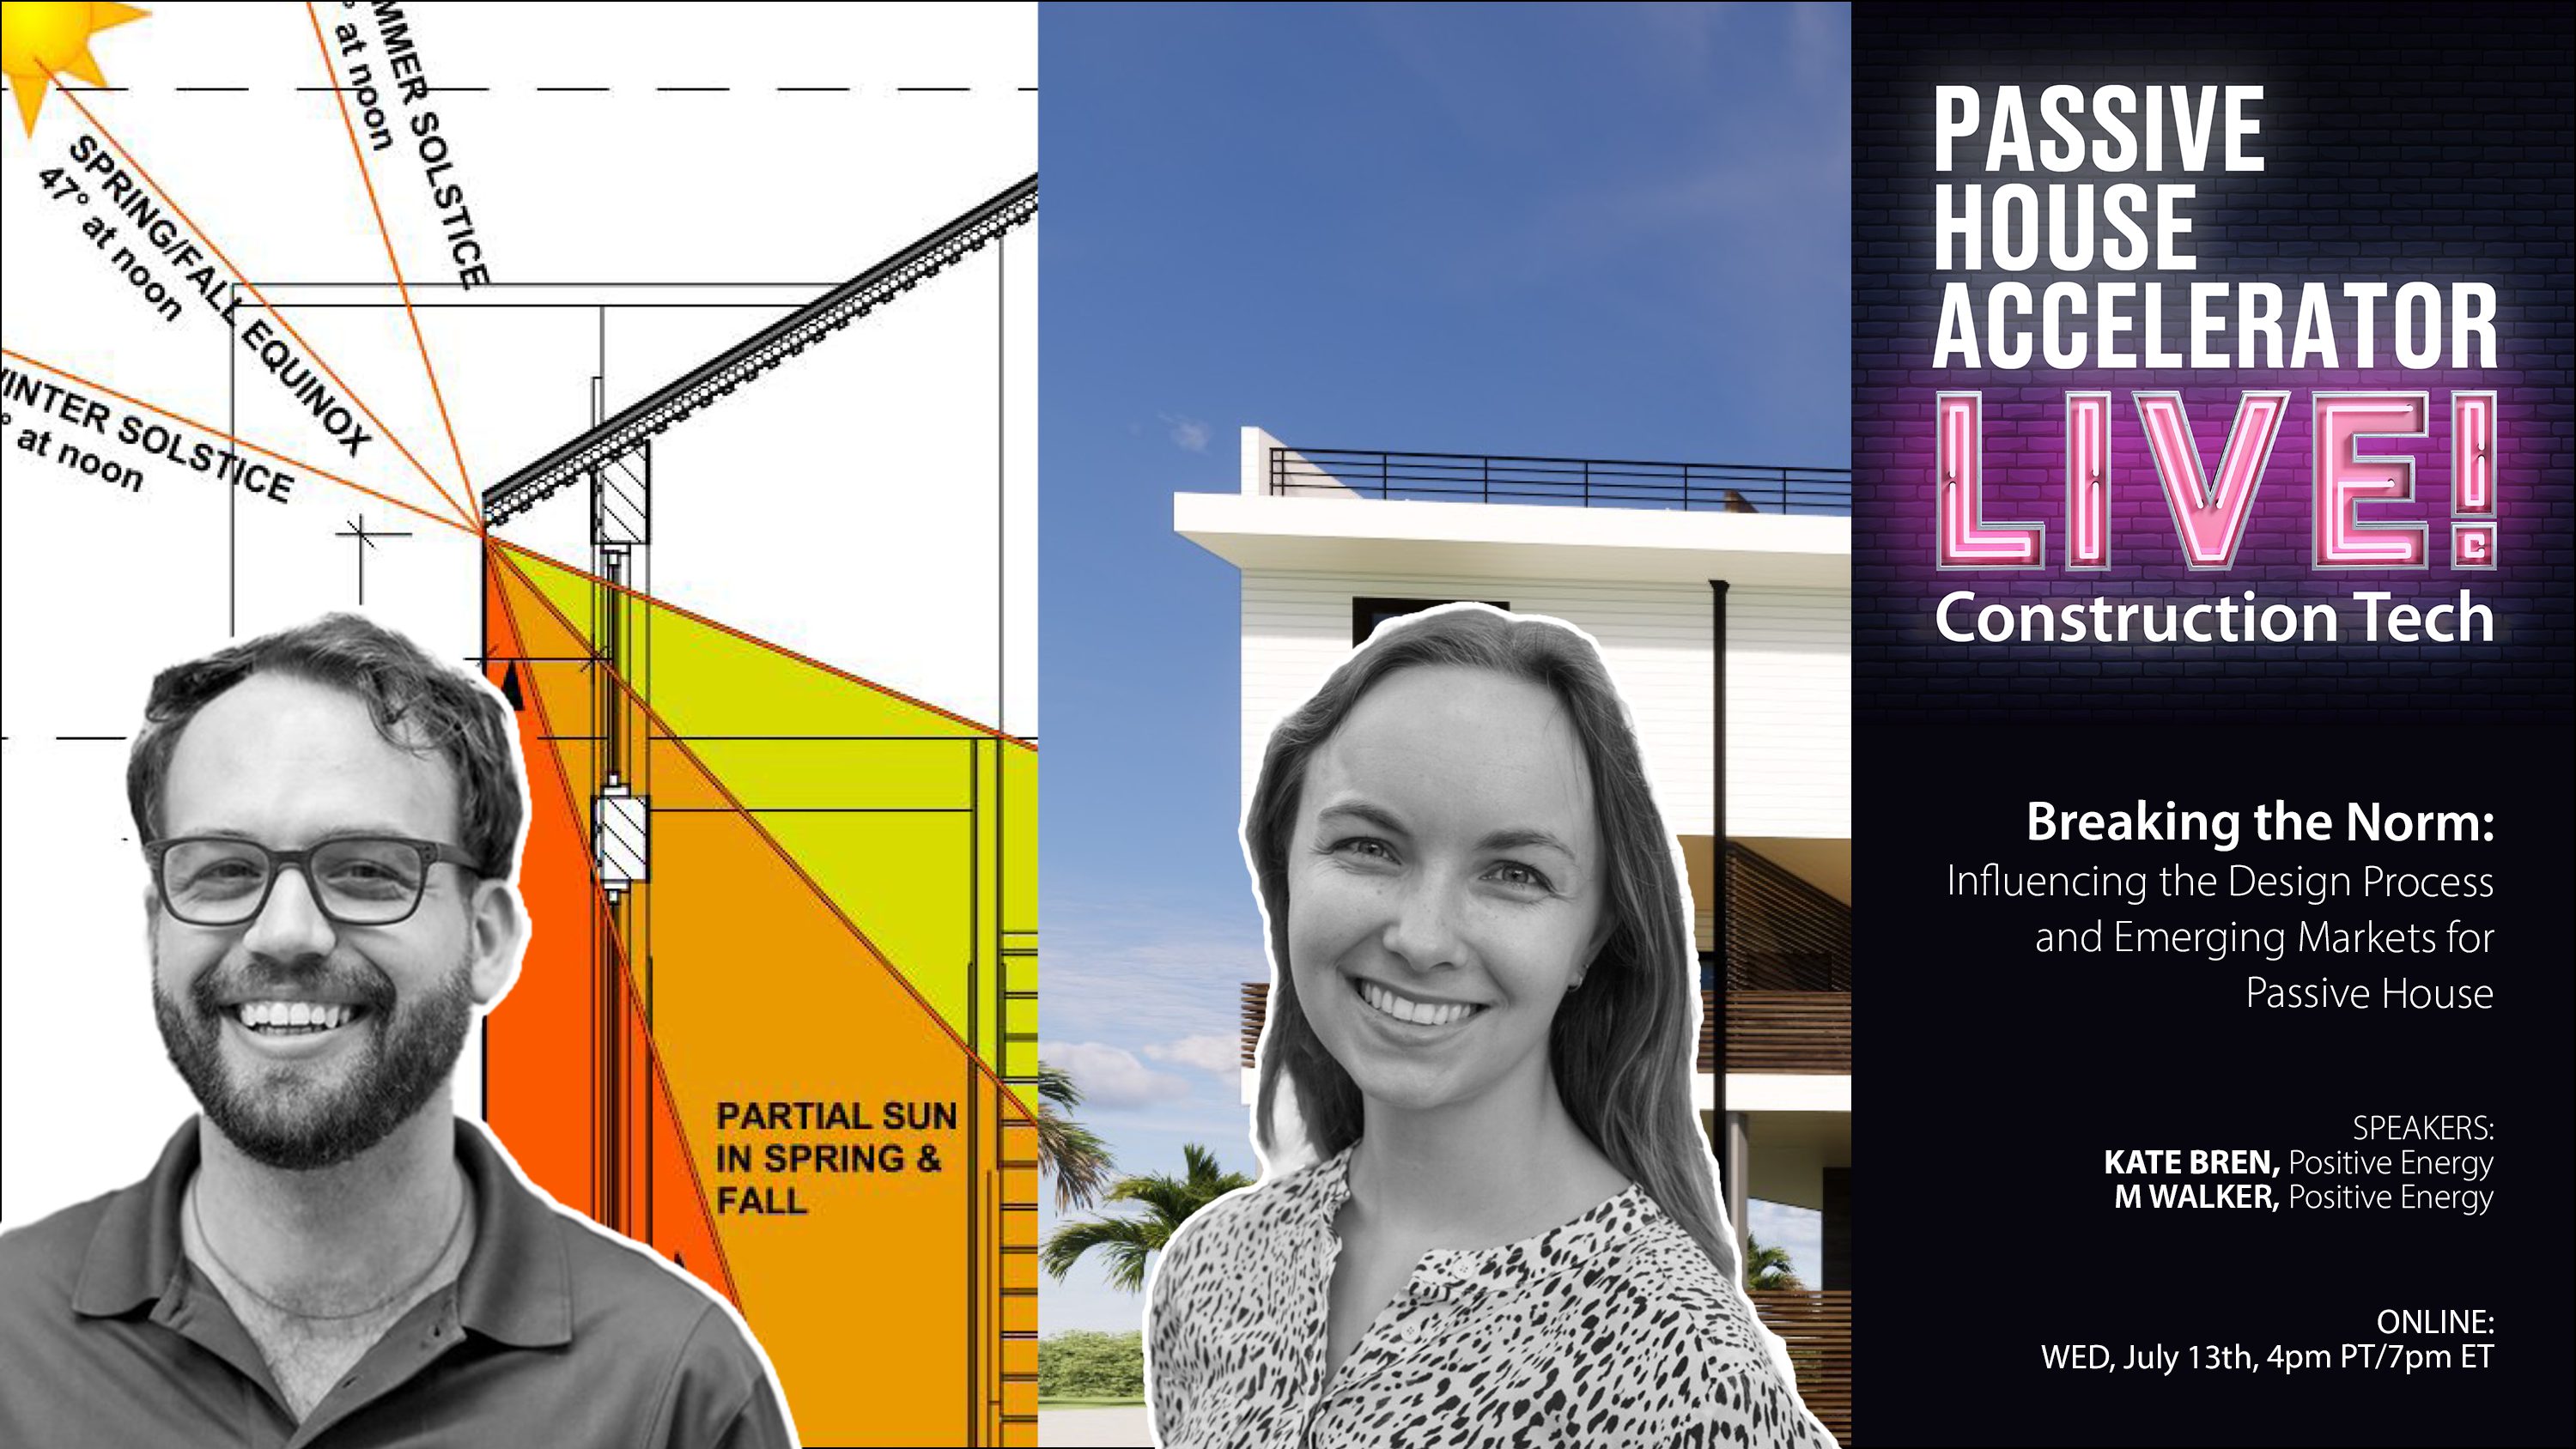 Breaking the Norm: Influencing the Design Process and Emerging Markets for Passive House